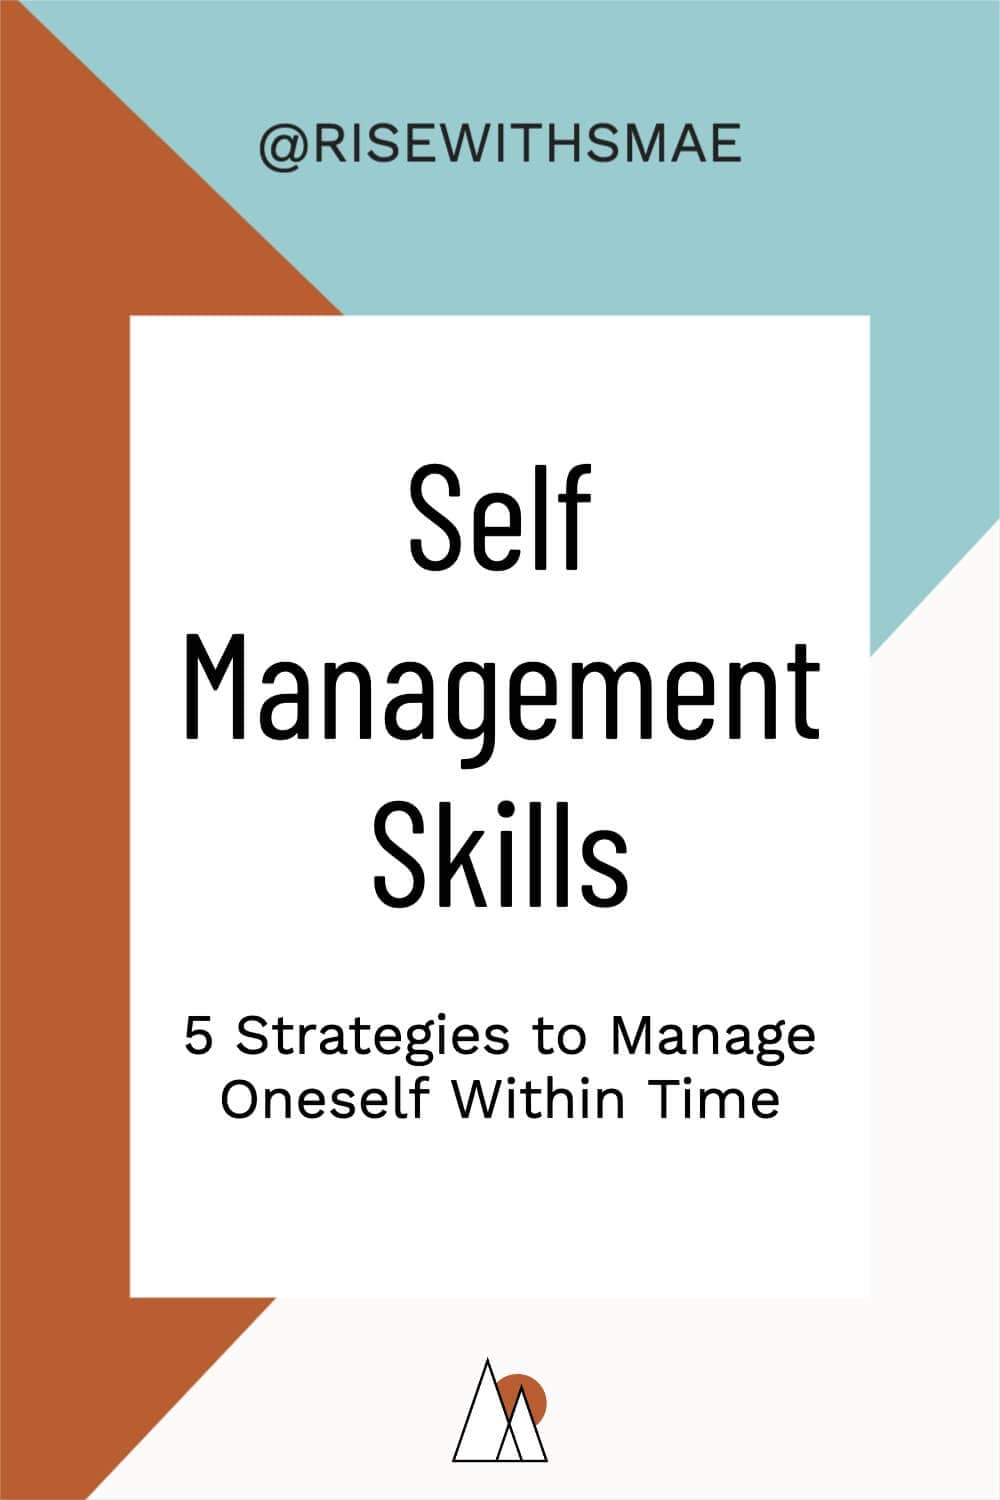 Self Management Skills: 5 Strategies to Manage Oneself Within Time